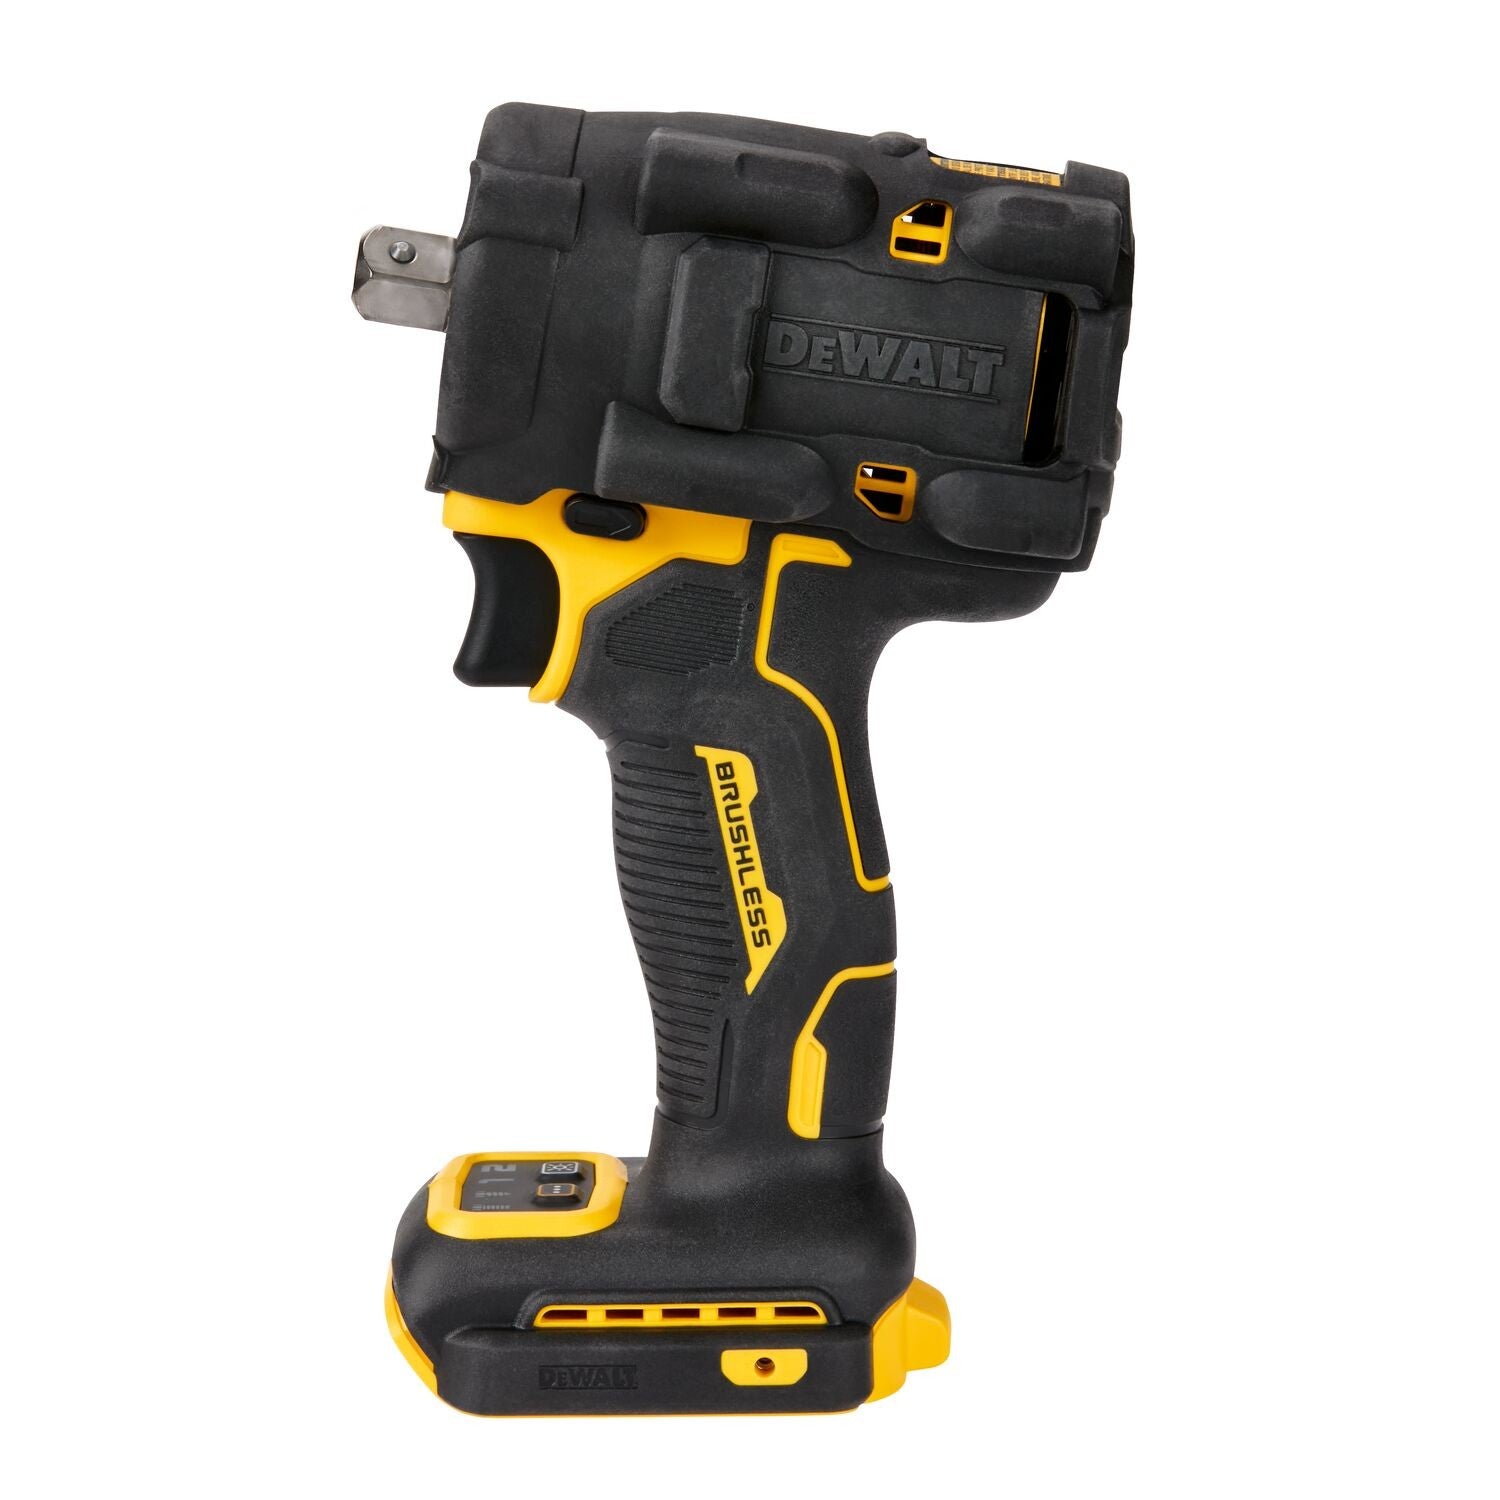 DeWalt DCF922B ATOMIC 20V MAX* 1/2 in. Cordless Impact Wrench with Detent Pin Anvil (Tool Only)